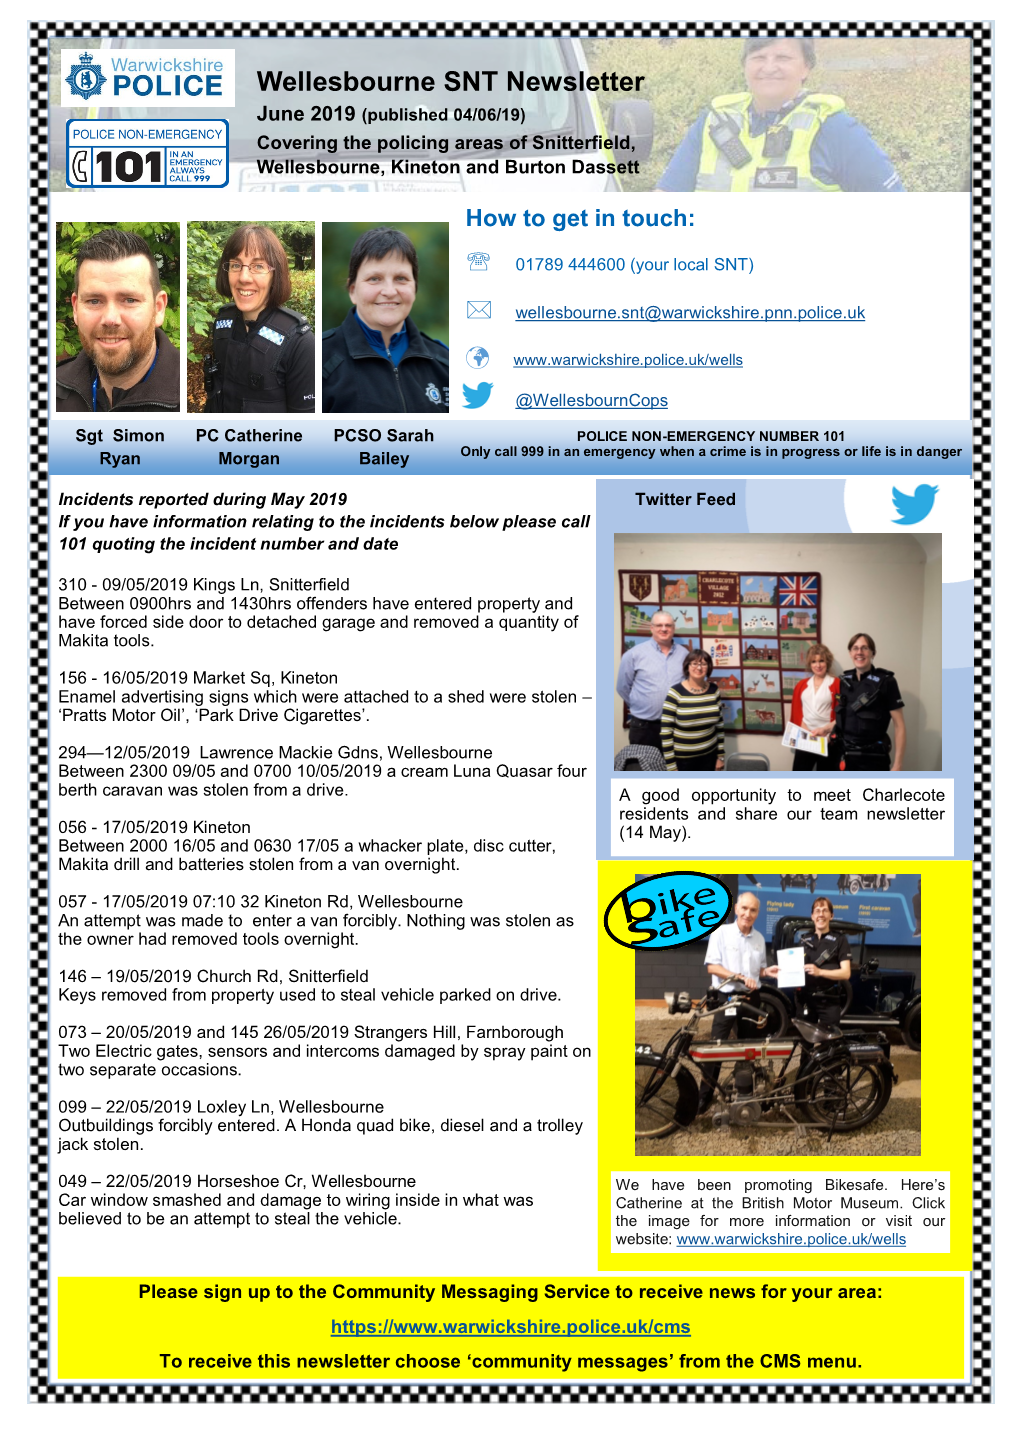 Wellesbourne SNT Newsletter June 2019 (Published 04/06/19) Covering the Policing Areas of Snitterfield, Wellesbourne, Kineton and Burton Dassett